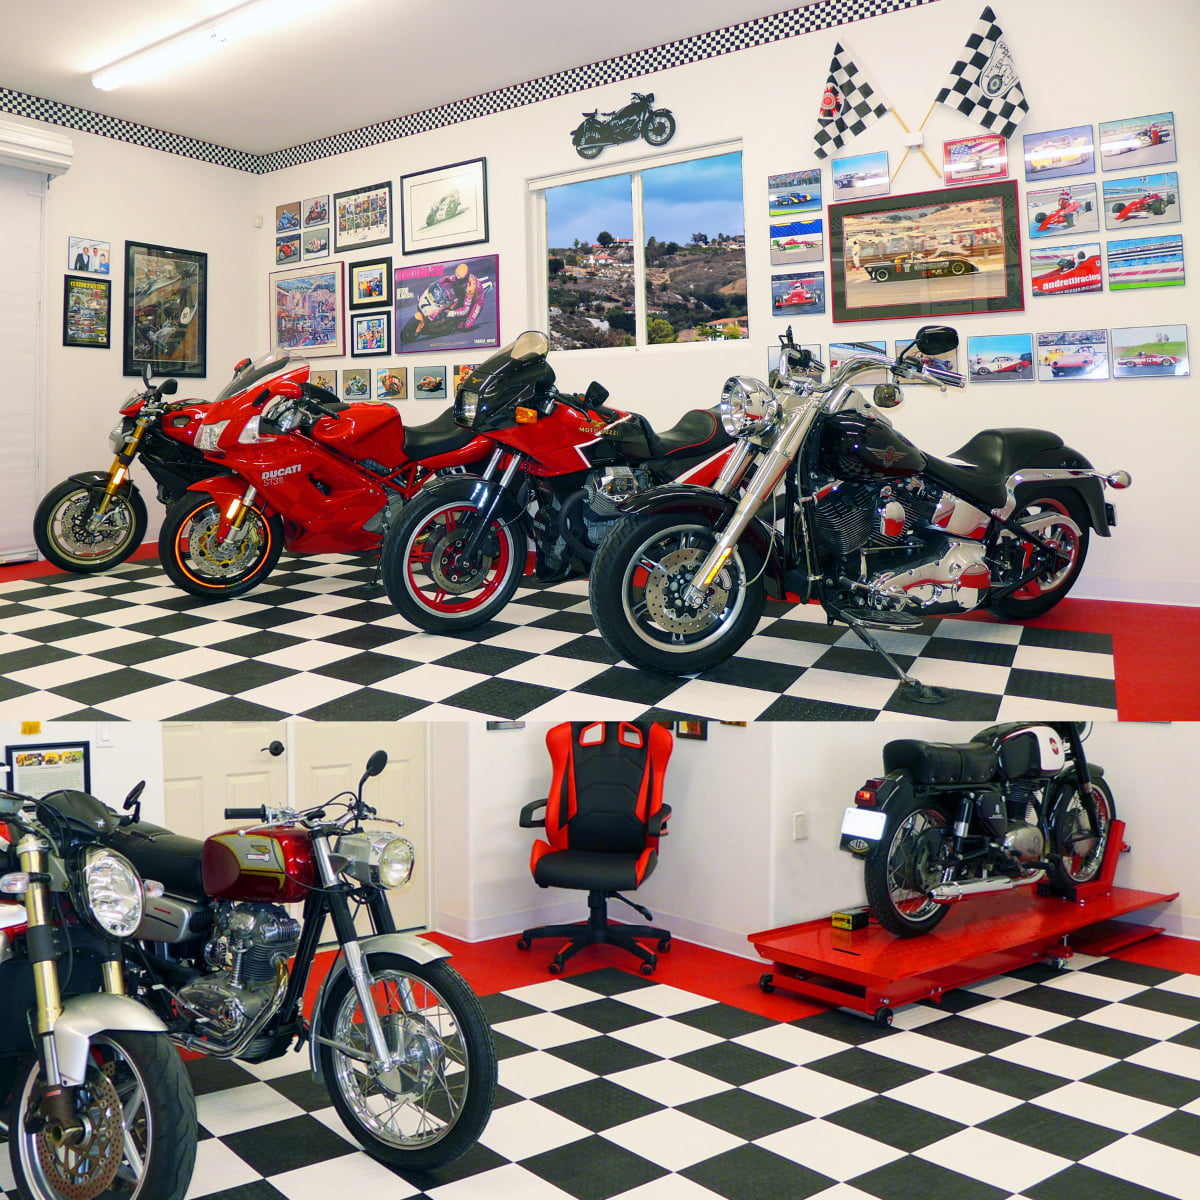 Motorcycle bikes with our Coin black, white and red garage tiles.